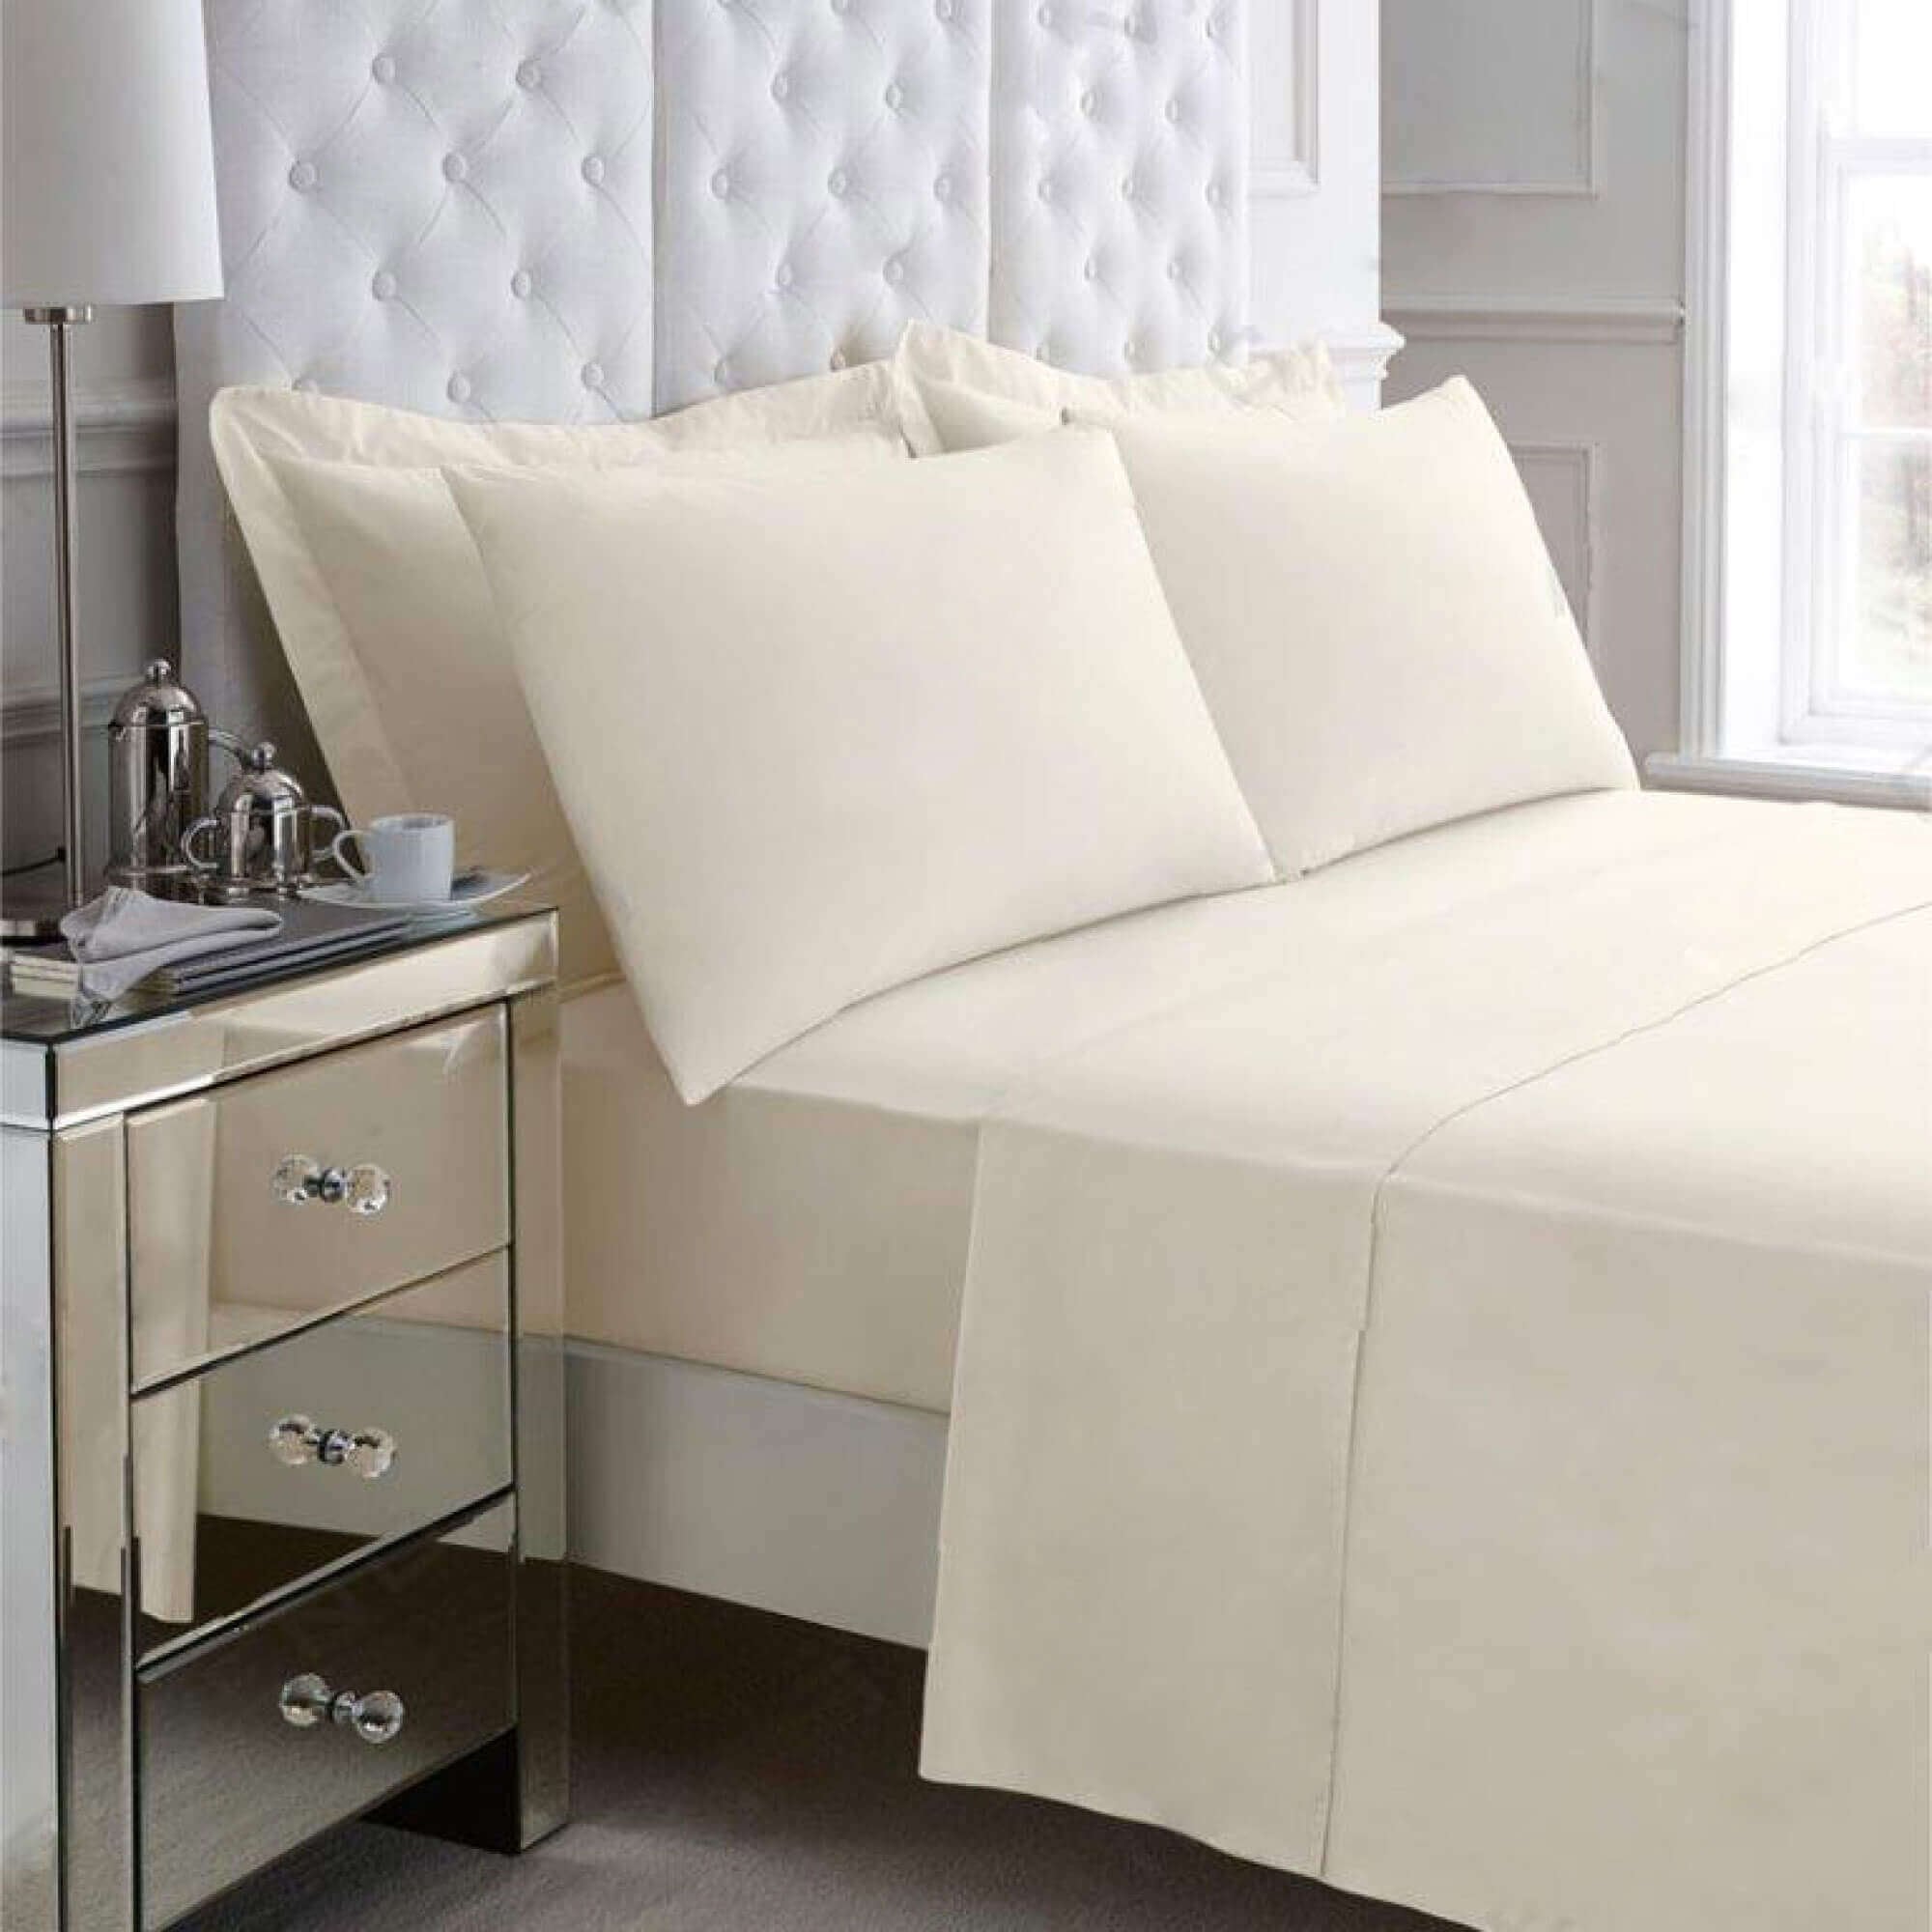 Non Iron Percale Bedding Sheet Range - Cream - King Fitted Valance - TJ Hughes